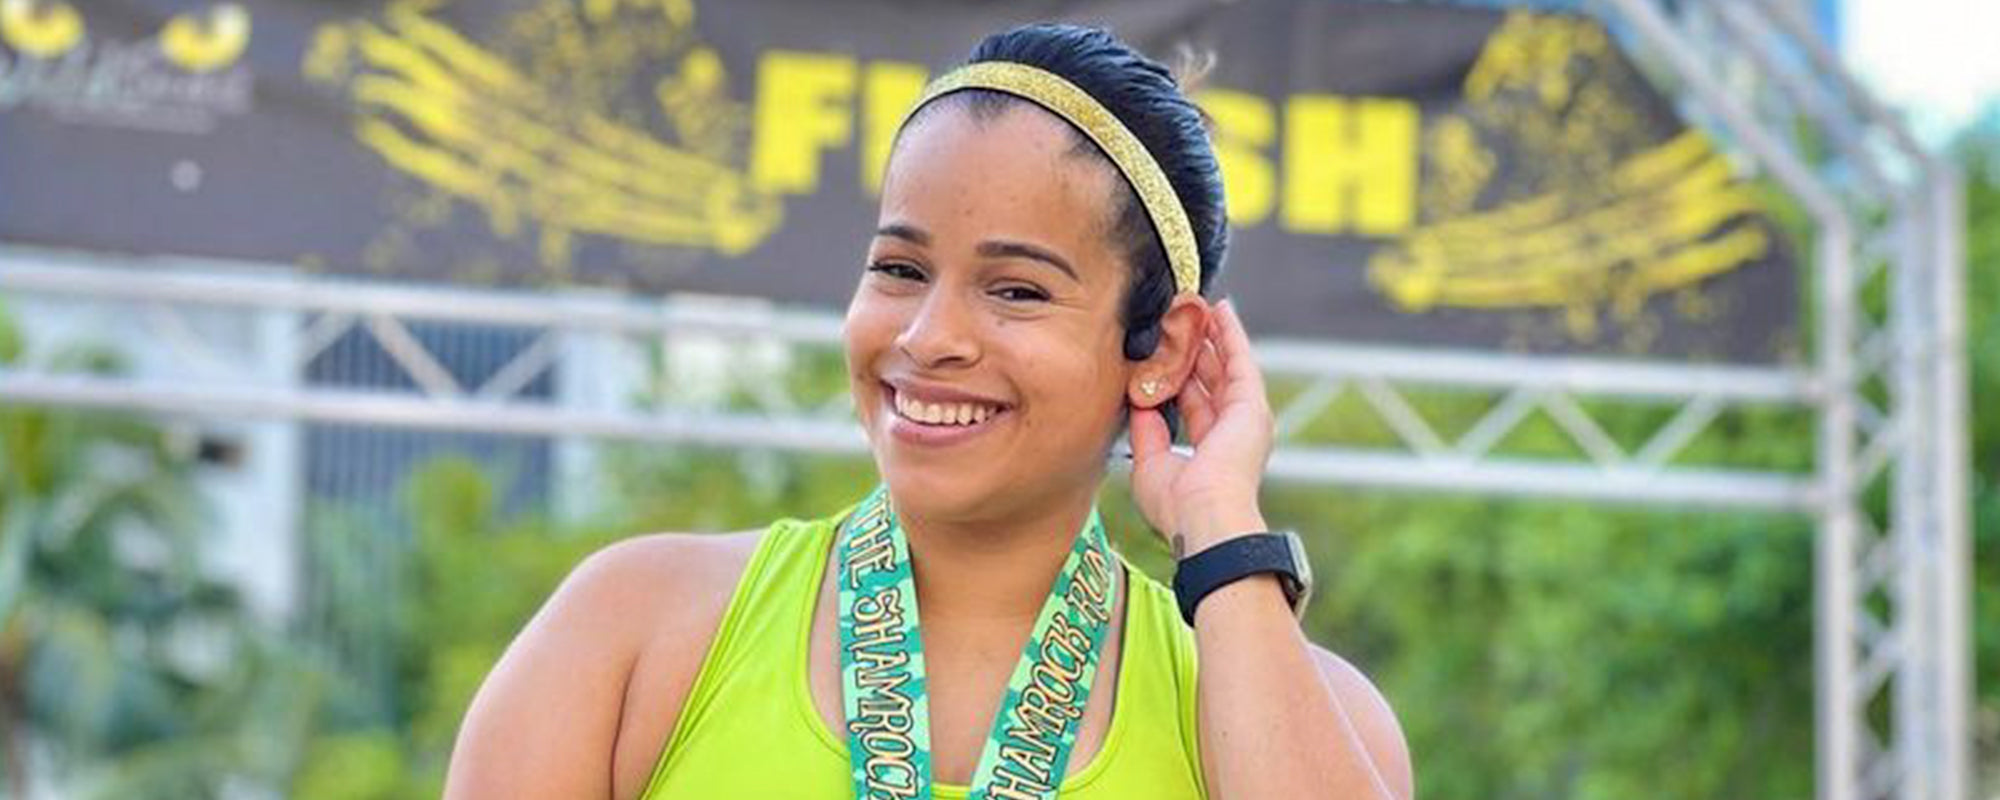 Woman wearing race medal and AfterShokz wireless headphones